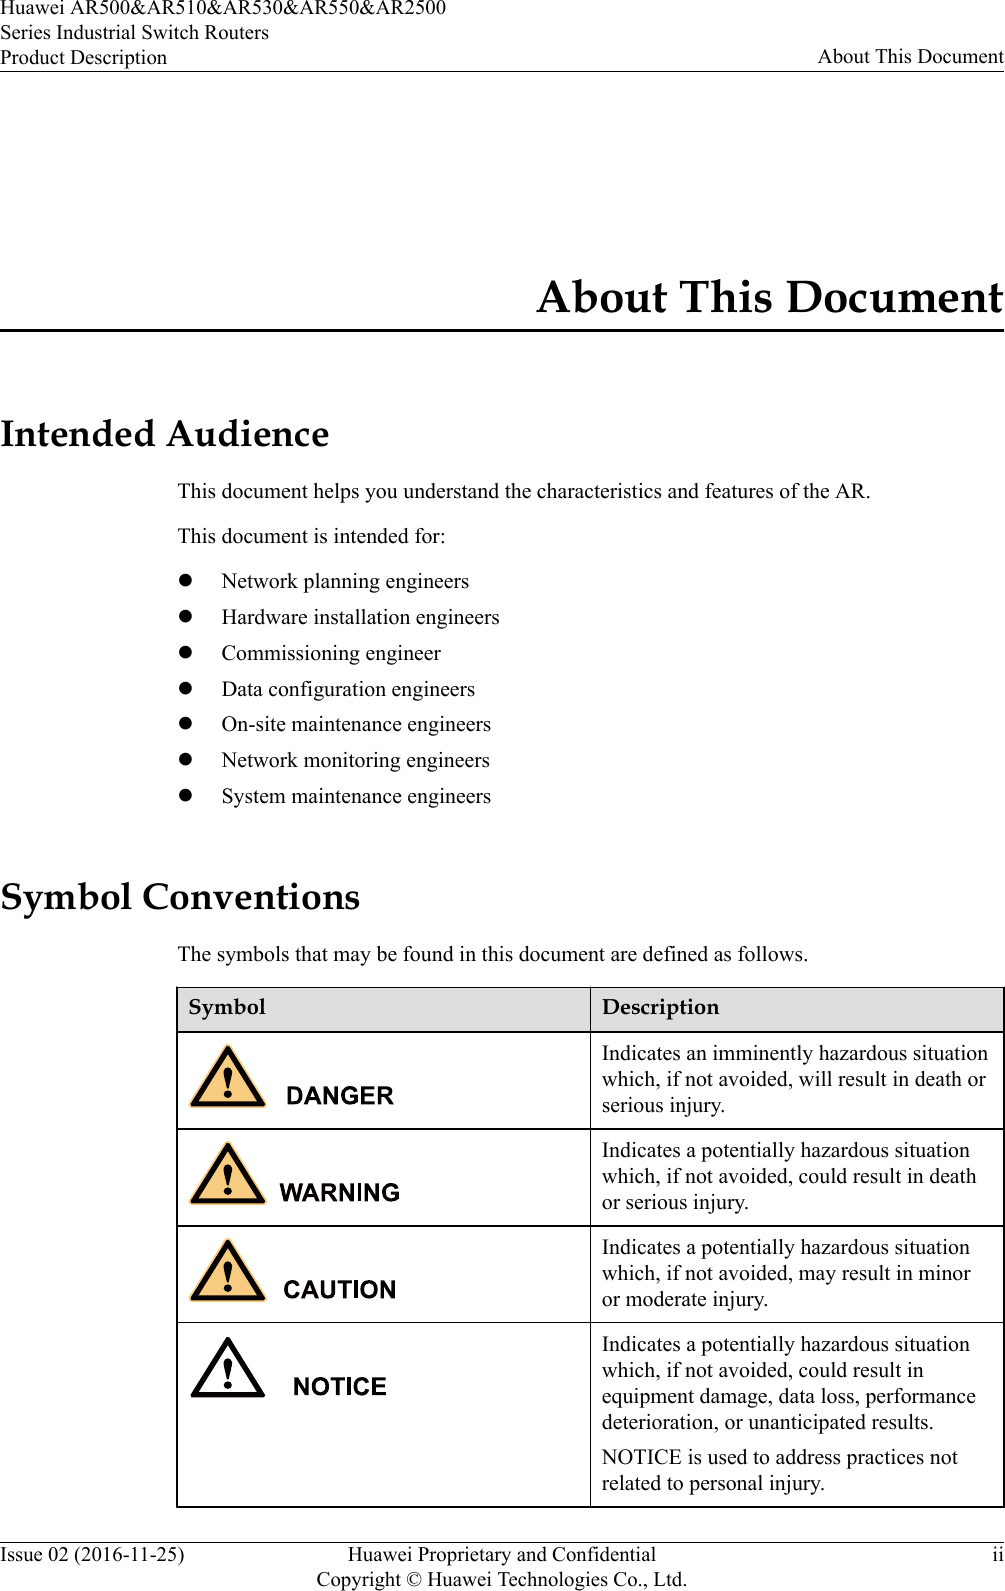 About This DocumentIntended AudienceThis document helps you understand the characteristics and features of the AR.This document is intended for:lNetwork planning engineerslHardware installation engineerslCommissioning engineerlData configuration engineerslOn-site maintenance engineerslNetwork monitoring engineerslSystem maintenance engineersSymbol ConventionsThe symbols that may be found in this document are defined as follows.Symbol DescriptionIndicates an imminently hazardous situationwhich, if not avoided, will result in death orserious injury.Indicates a potentially hazardous situationwhich, if not avoided, could result in deathor serious injury.Indicates a potentially hazardous situationwhich, if not avoided, may result in minoror moderate injury.Indicates a potentially hazardous situationwhich, if not avoided, could result inequipment damage, data loss, performancedeterioration, or unanticipated results.NOTICE is used to address practices notrelated to personal injury.Huawei AR500&amp;AR510&amp;AR530&amp;AR550&amp;AR2500Series Industrial Switch RoutersProduct Description About This DocumentIssue 02 (2016-11-25) Huawei Proprietary and ConfidentialCopyright © Huawei Technologies Co., Ltd.ii